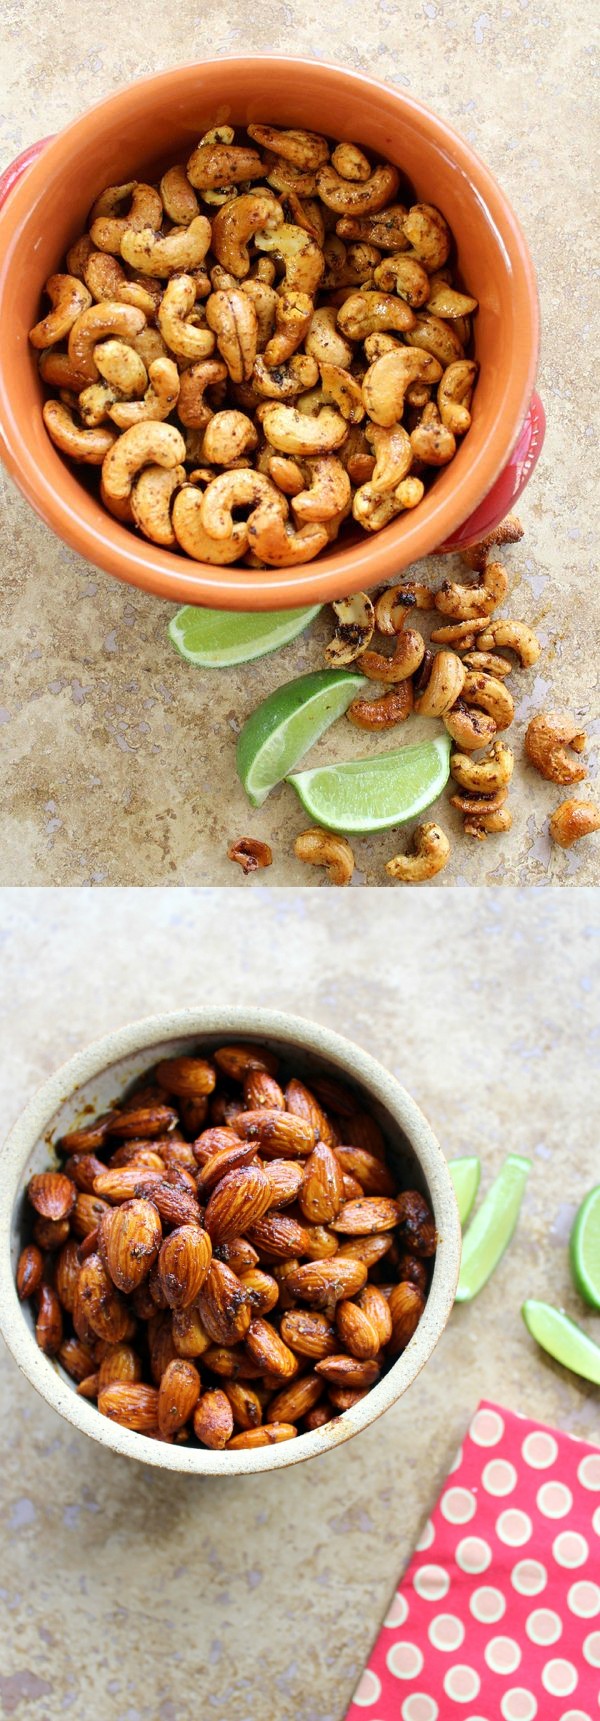 Caribbean Spiced Nuts